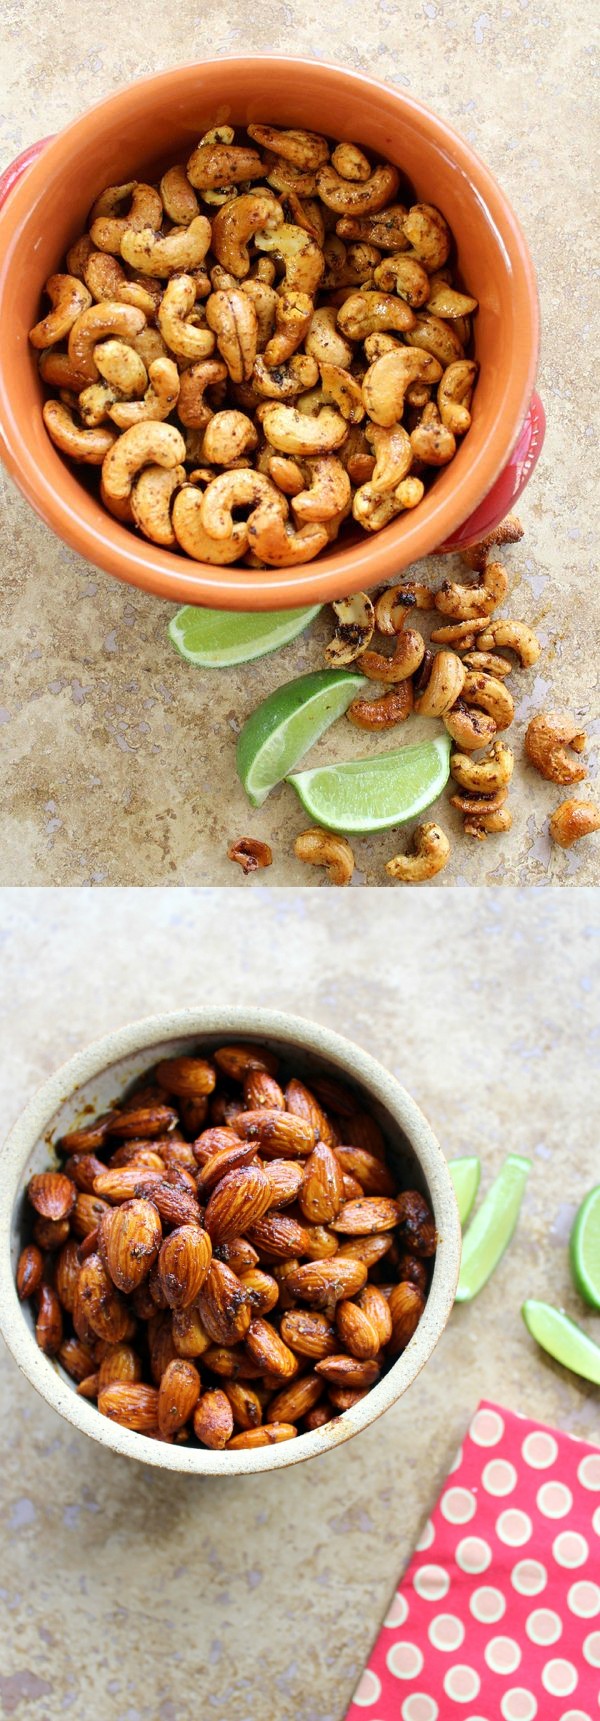 Caribbean Spiced Nuts